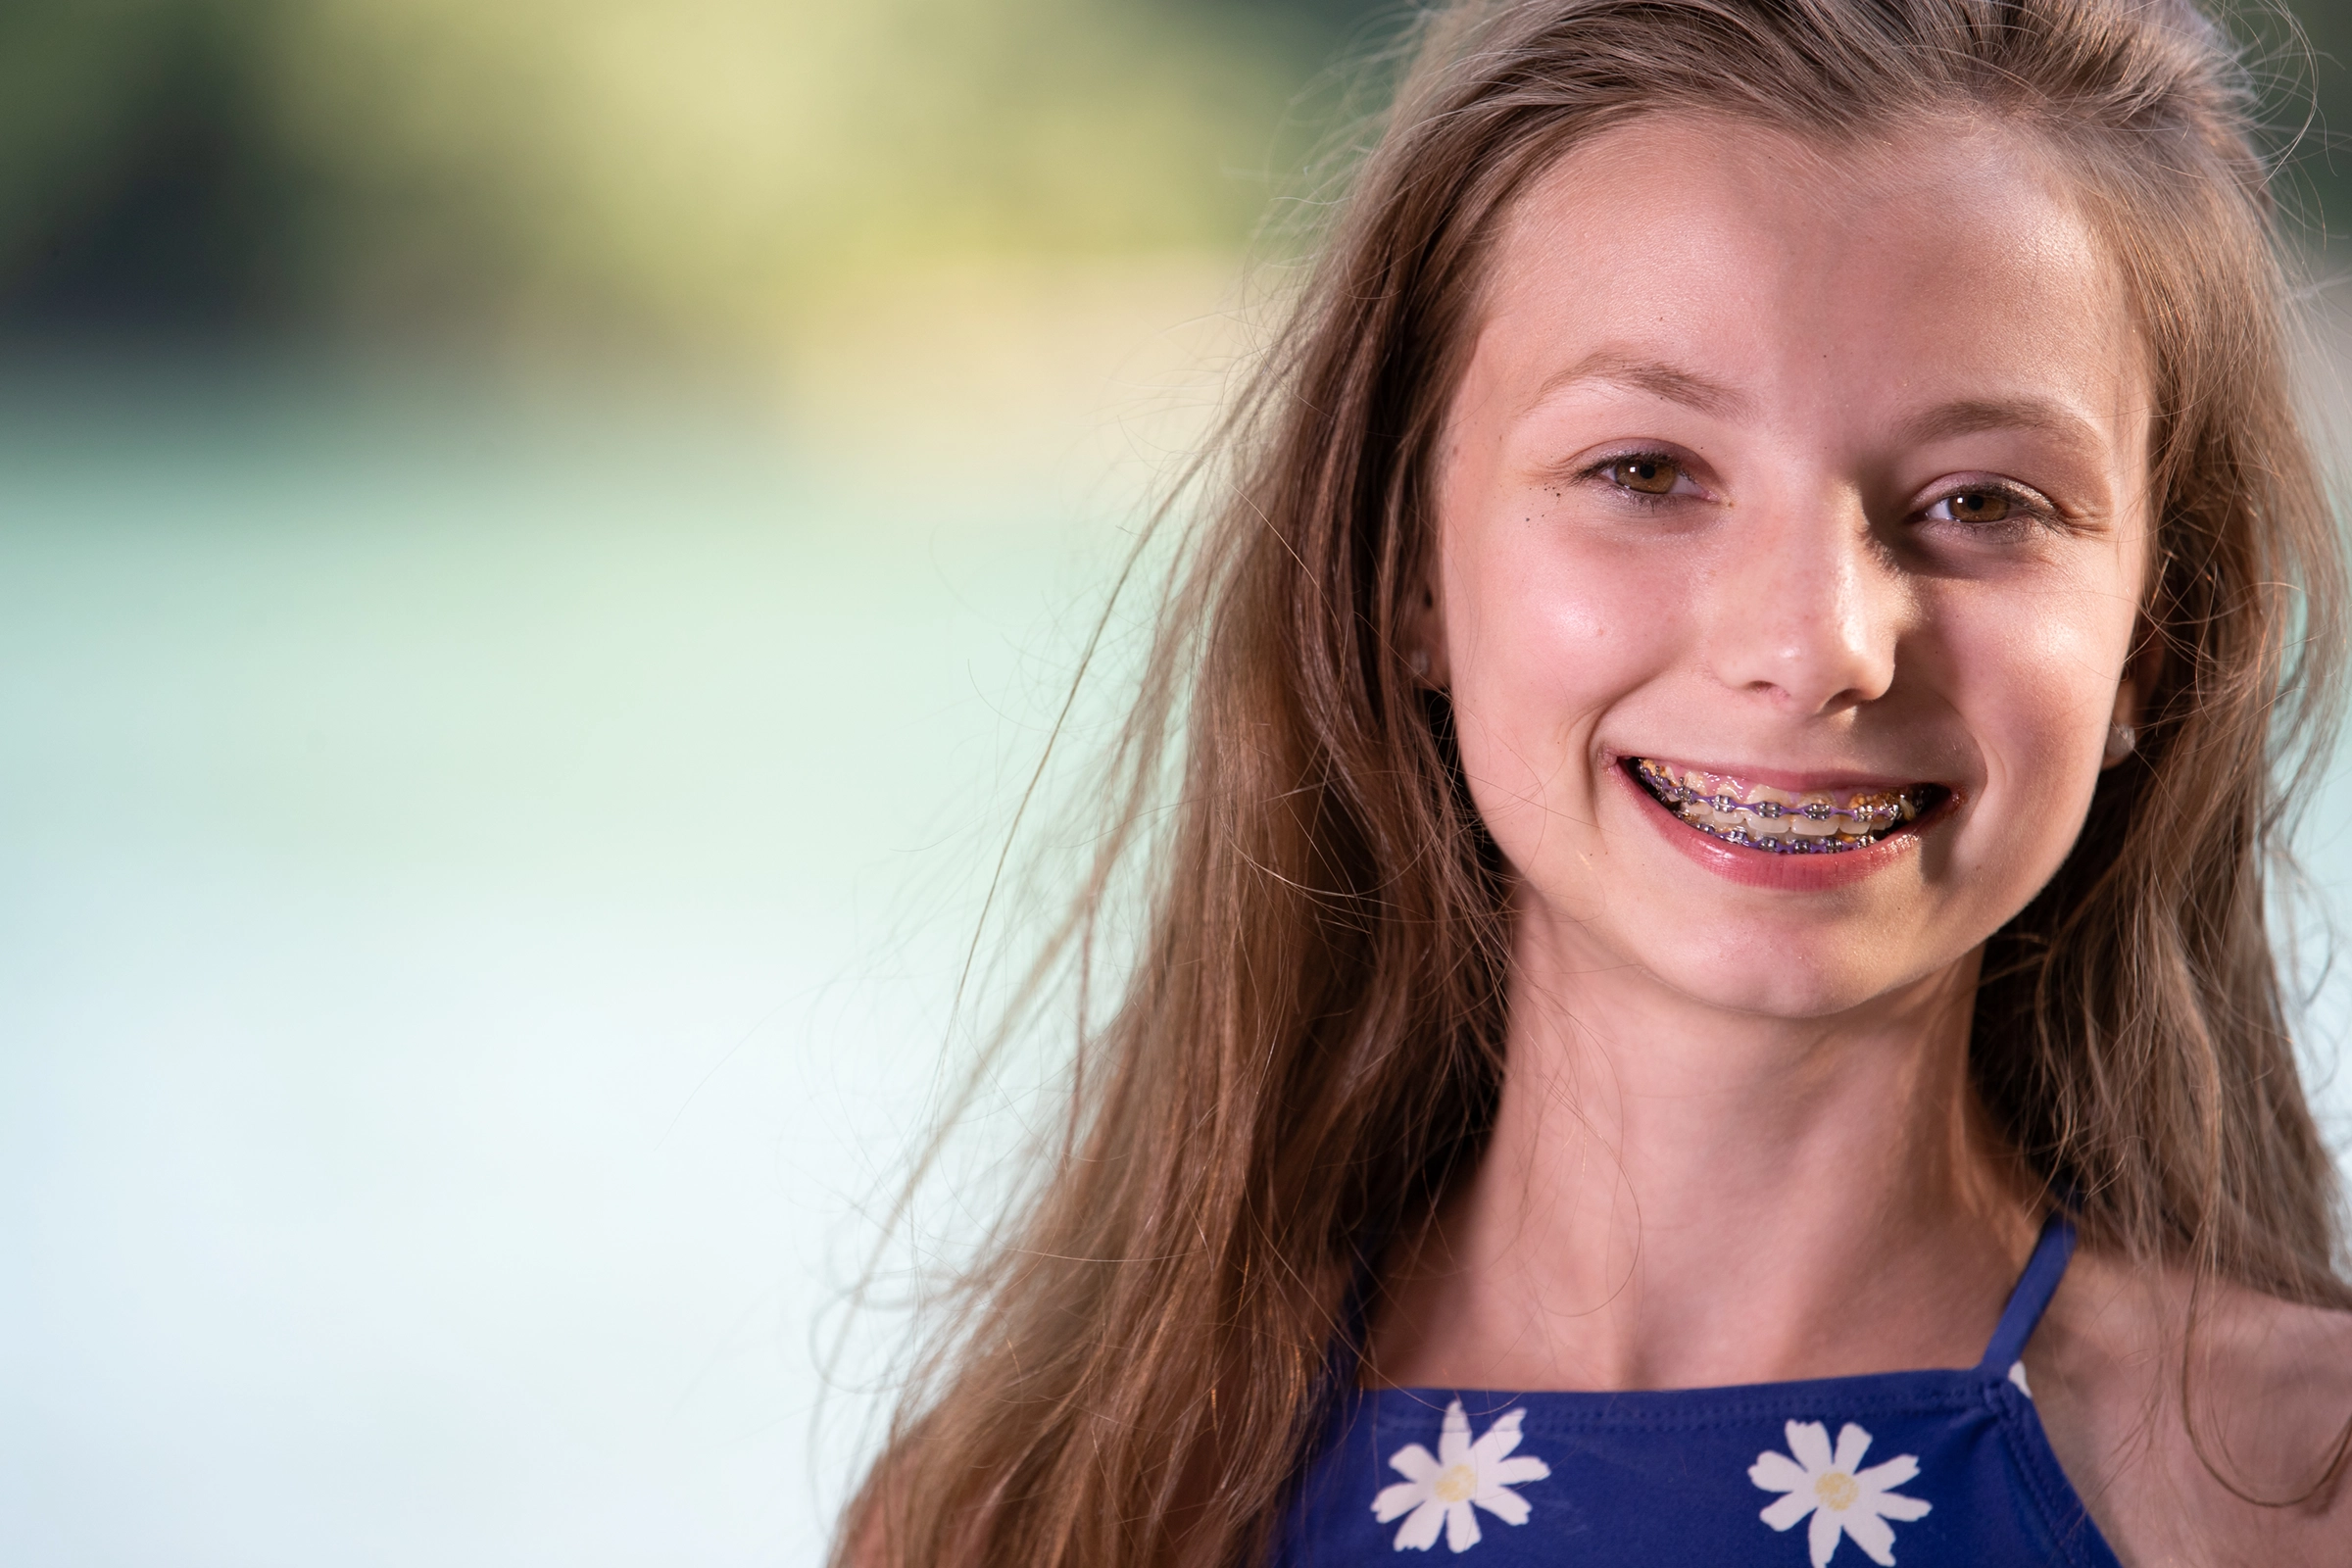 teen girl smiling with braces